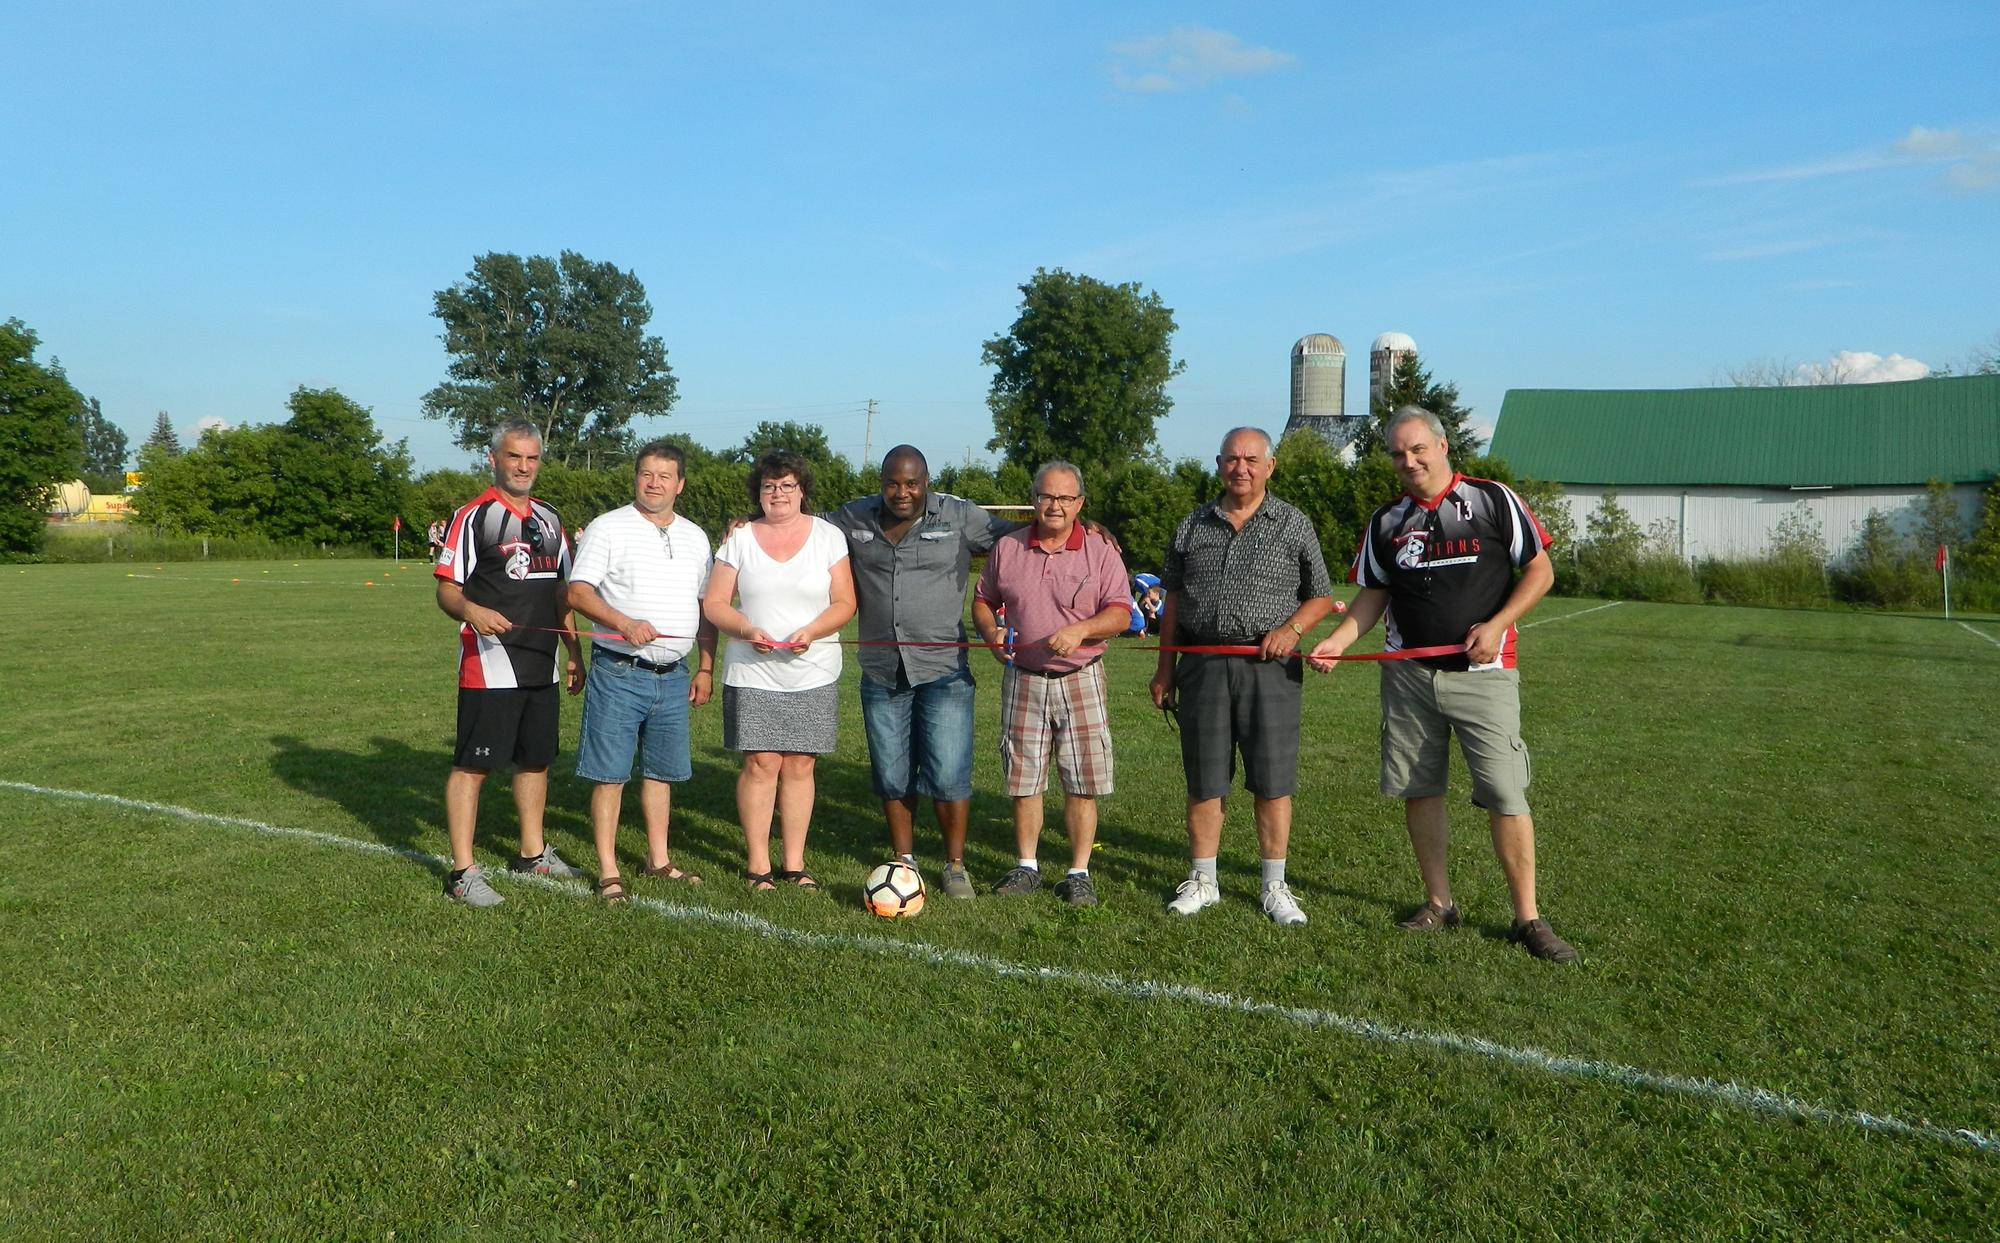 Official opening of the Ste-Rose Park soccer field